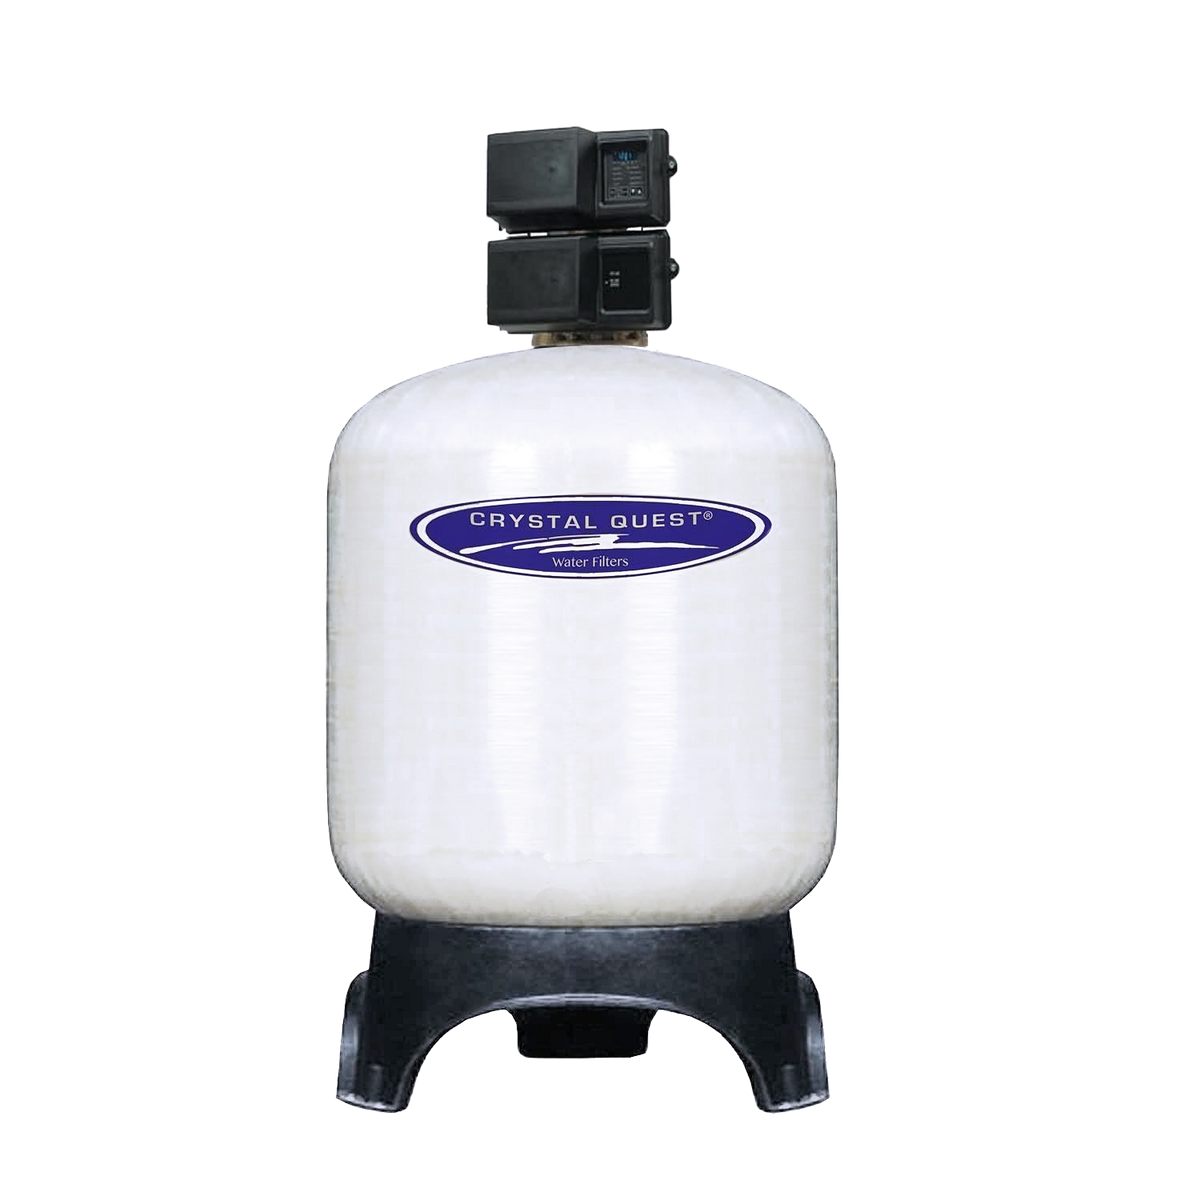 205 GPM / Automatic Acid Neutralizing Water Filtration System - Commercial - Crystal Quest